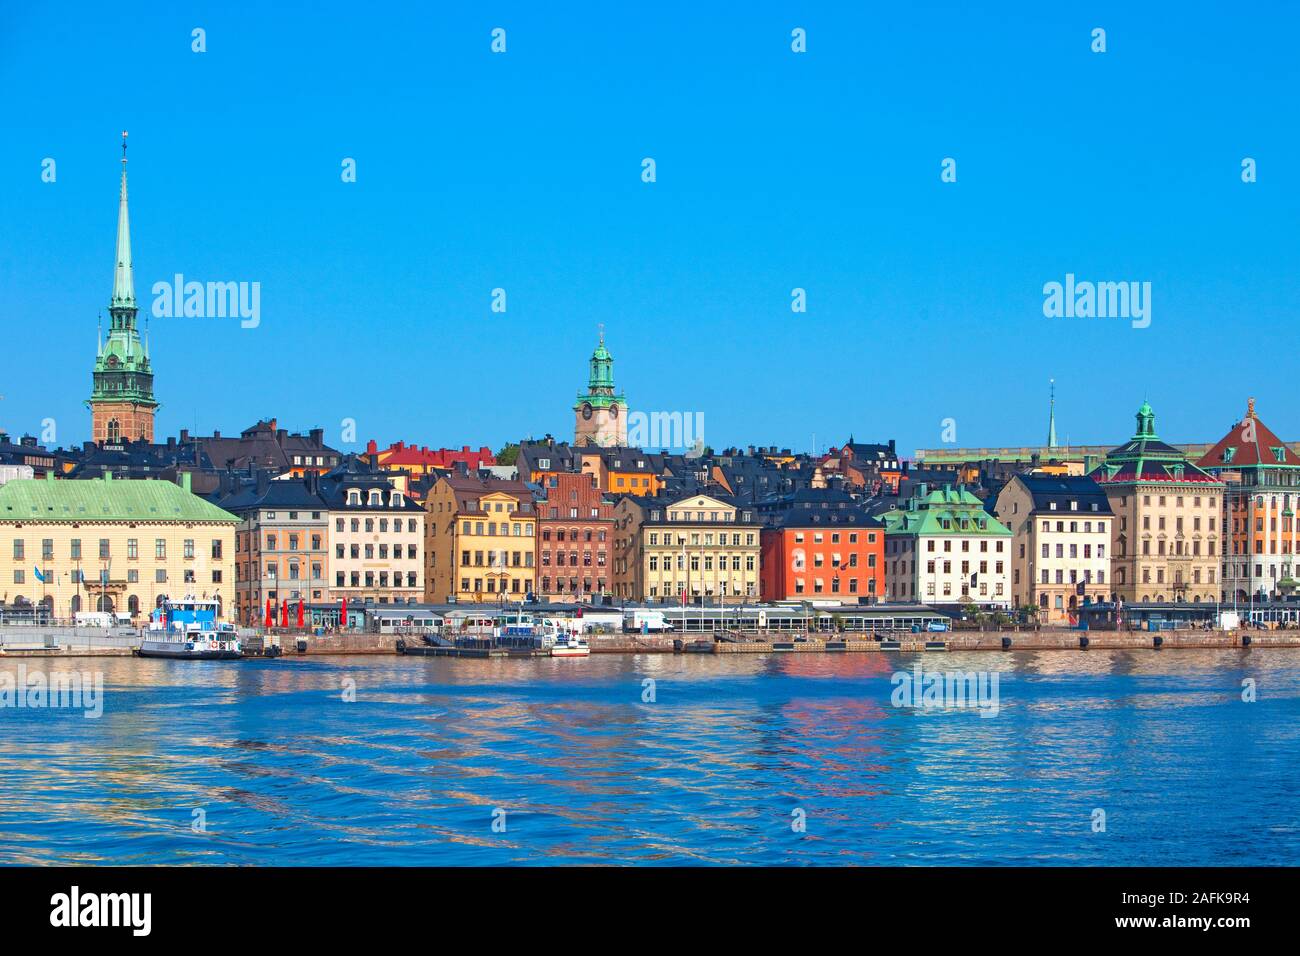 Sweden, Stockholm - The Old Town. Stock Photo